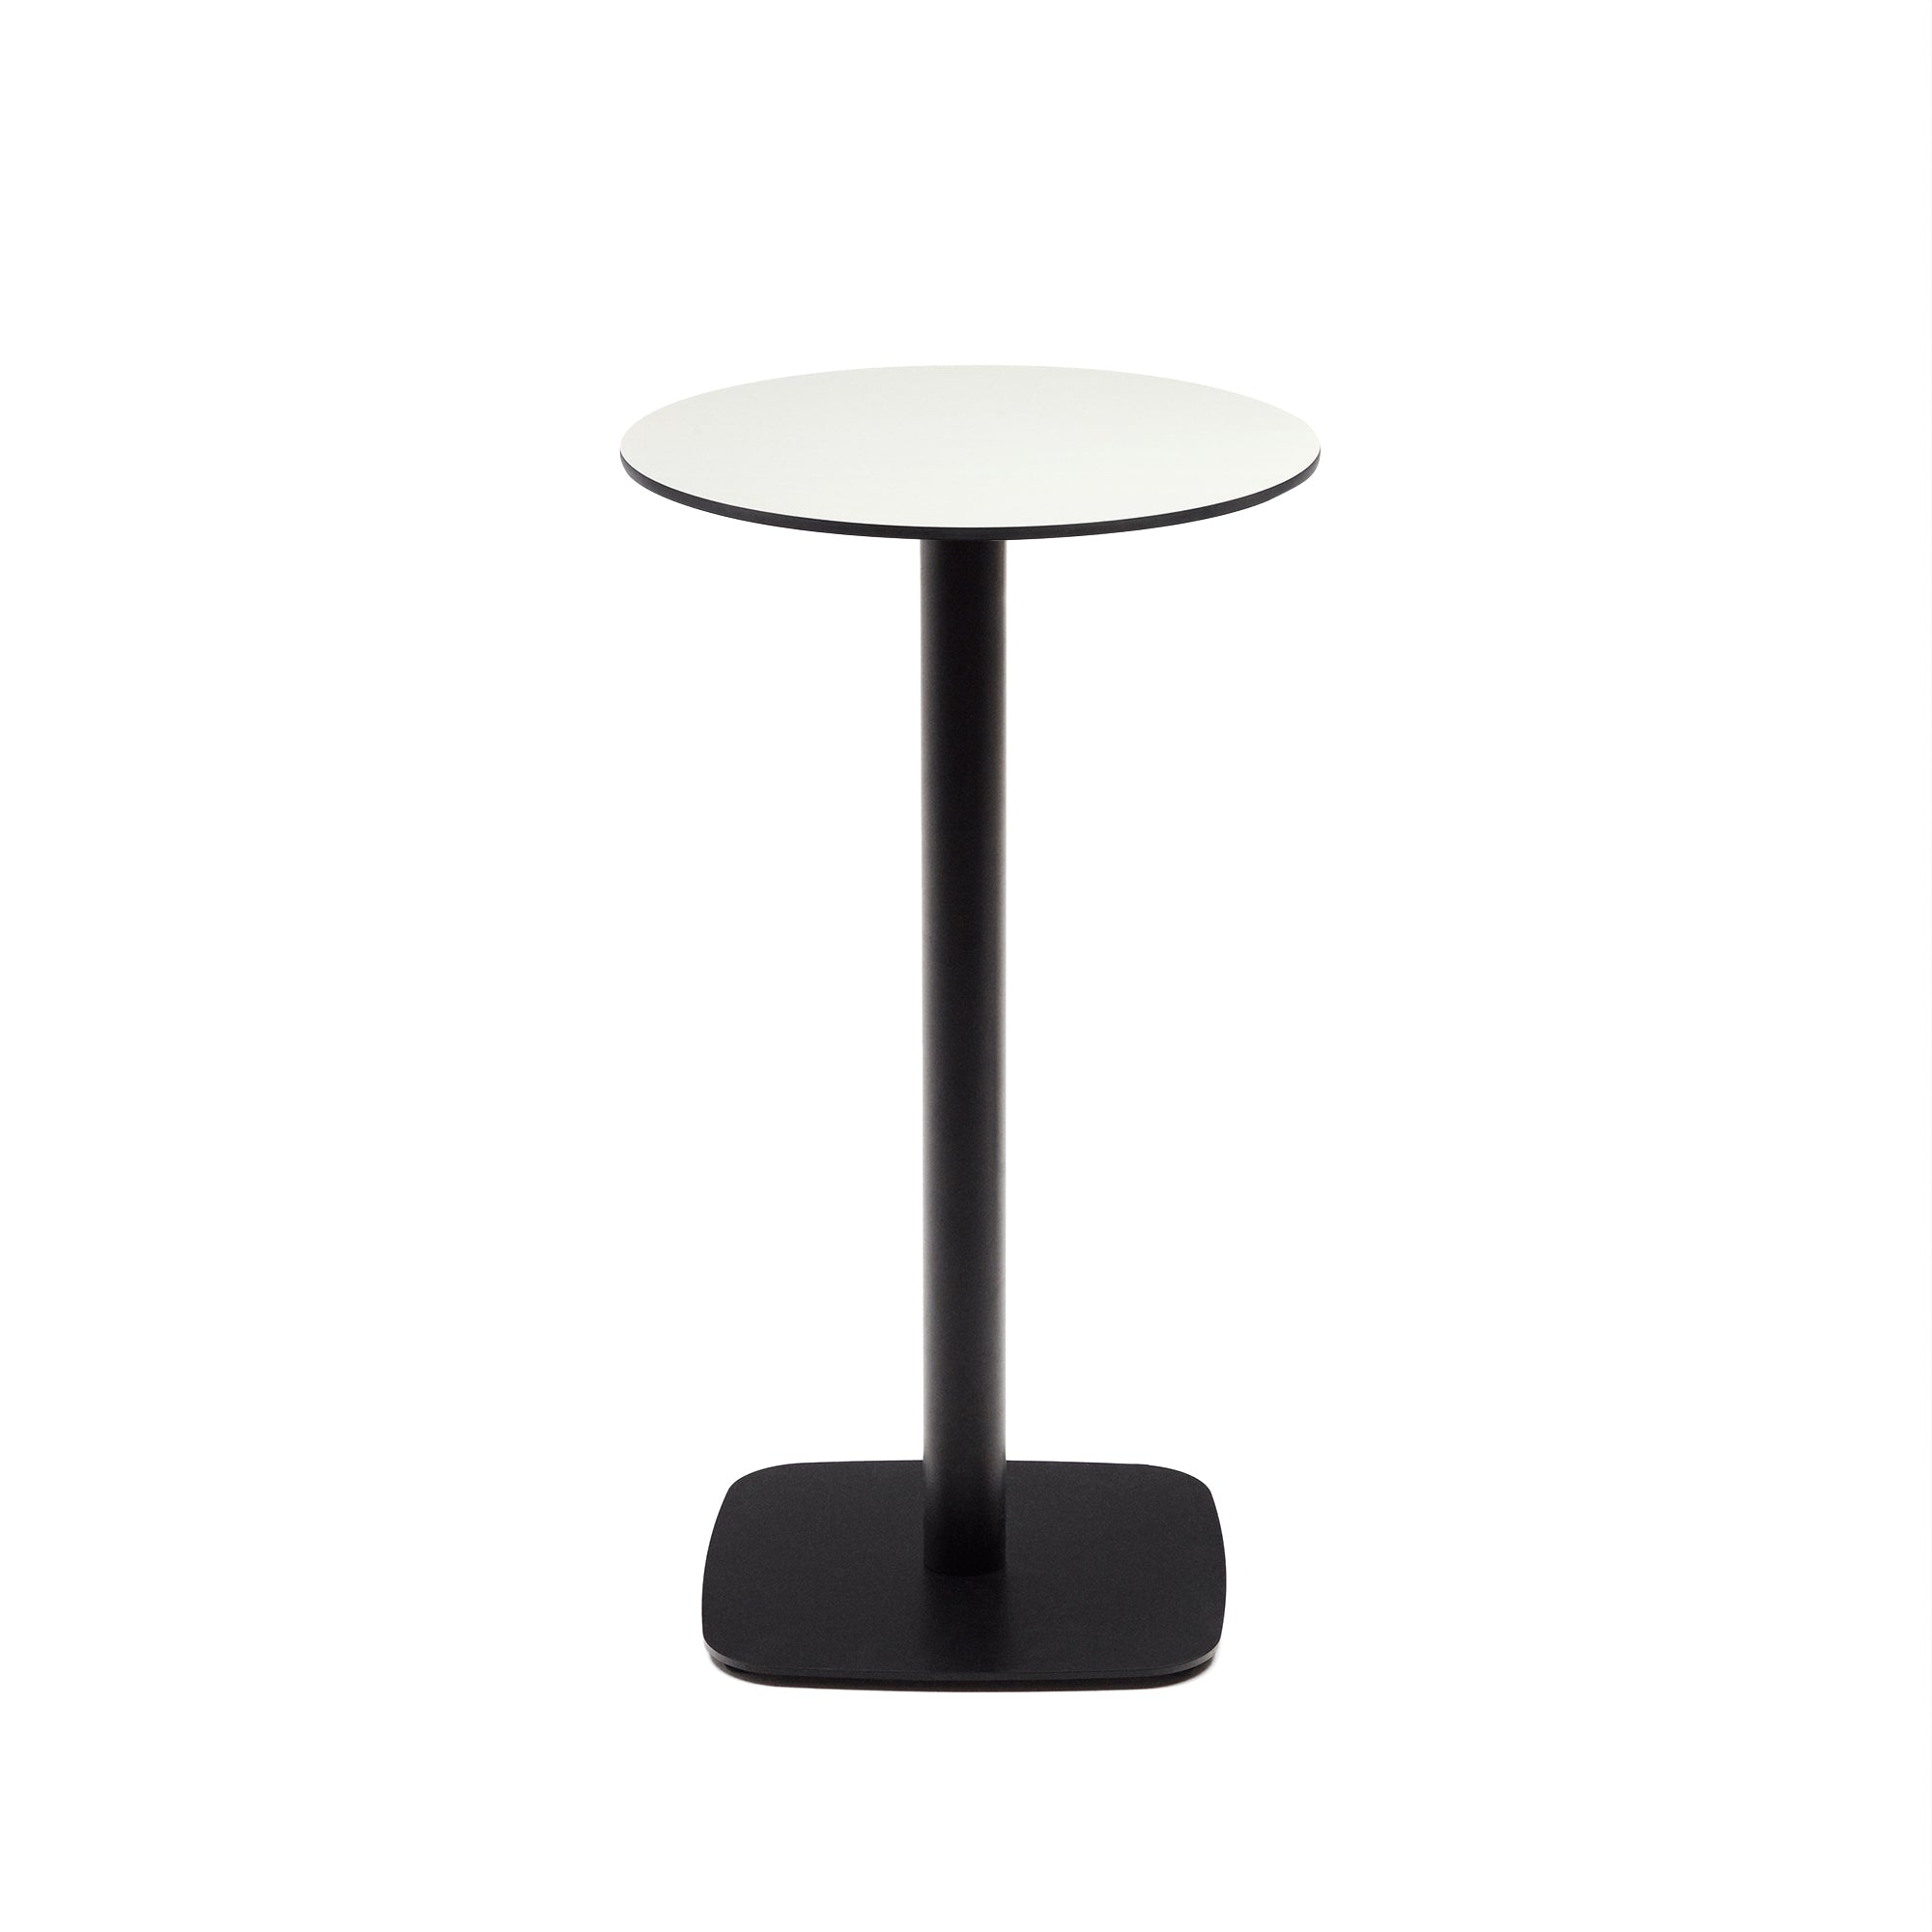 Dina high round outdoor table in white with metal leg in a painted black finish, Ø60x96 cm